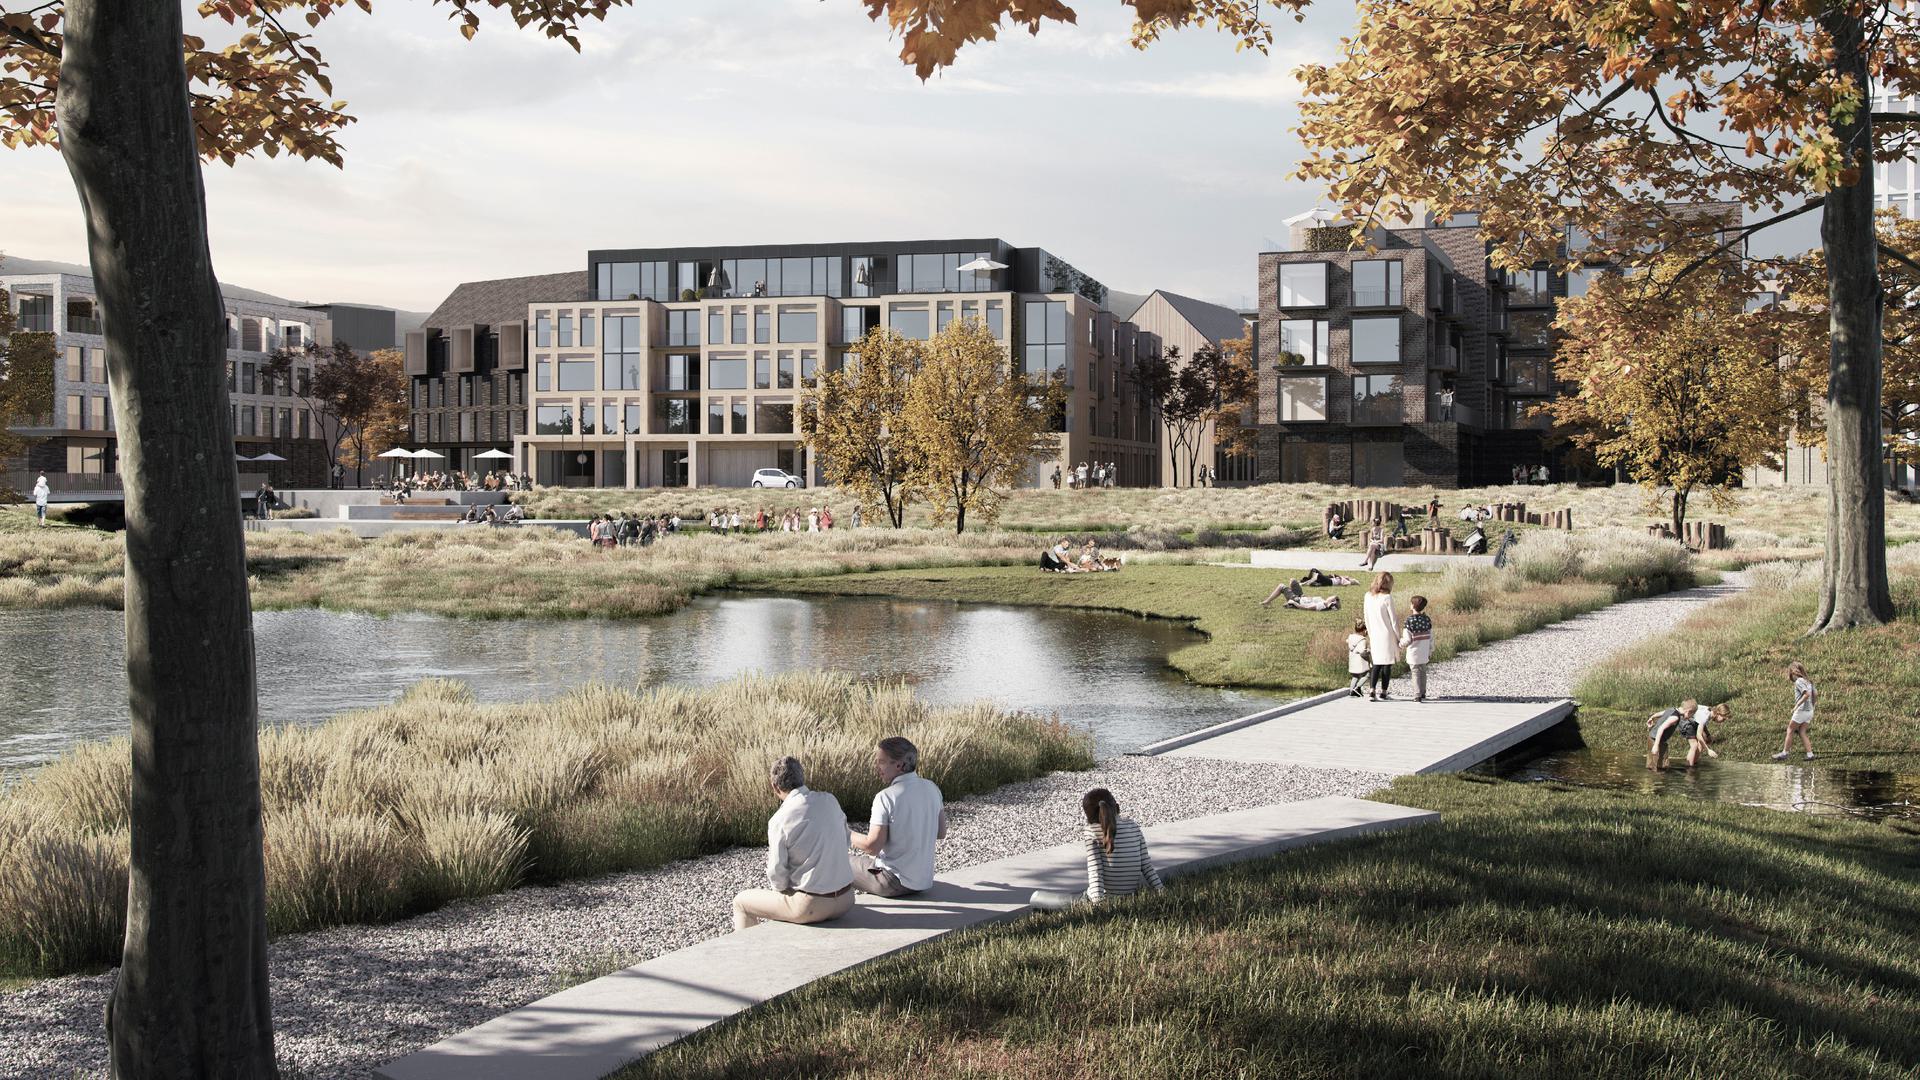 With Ny Rosborg, we are transforming Vejle's former landfill into a climate-adapted district in close contact with nature.